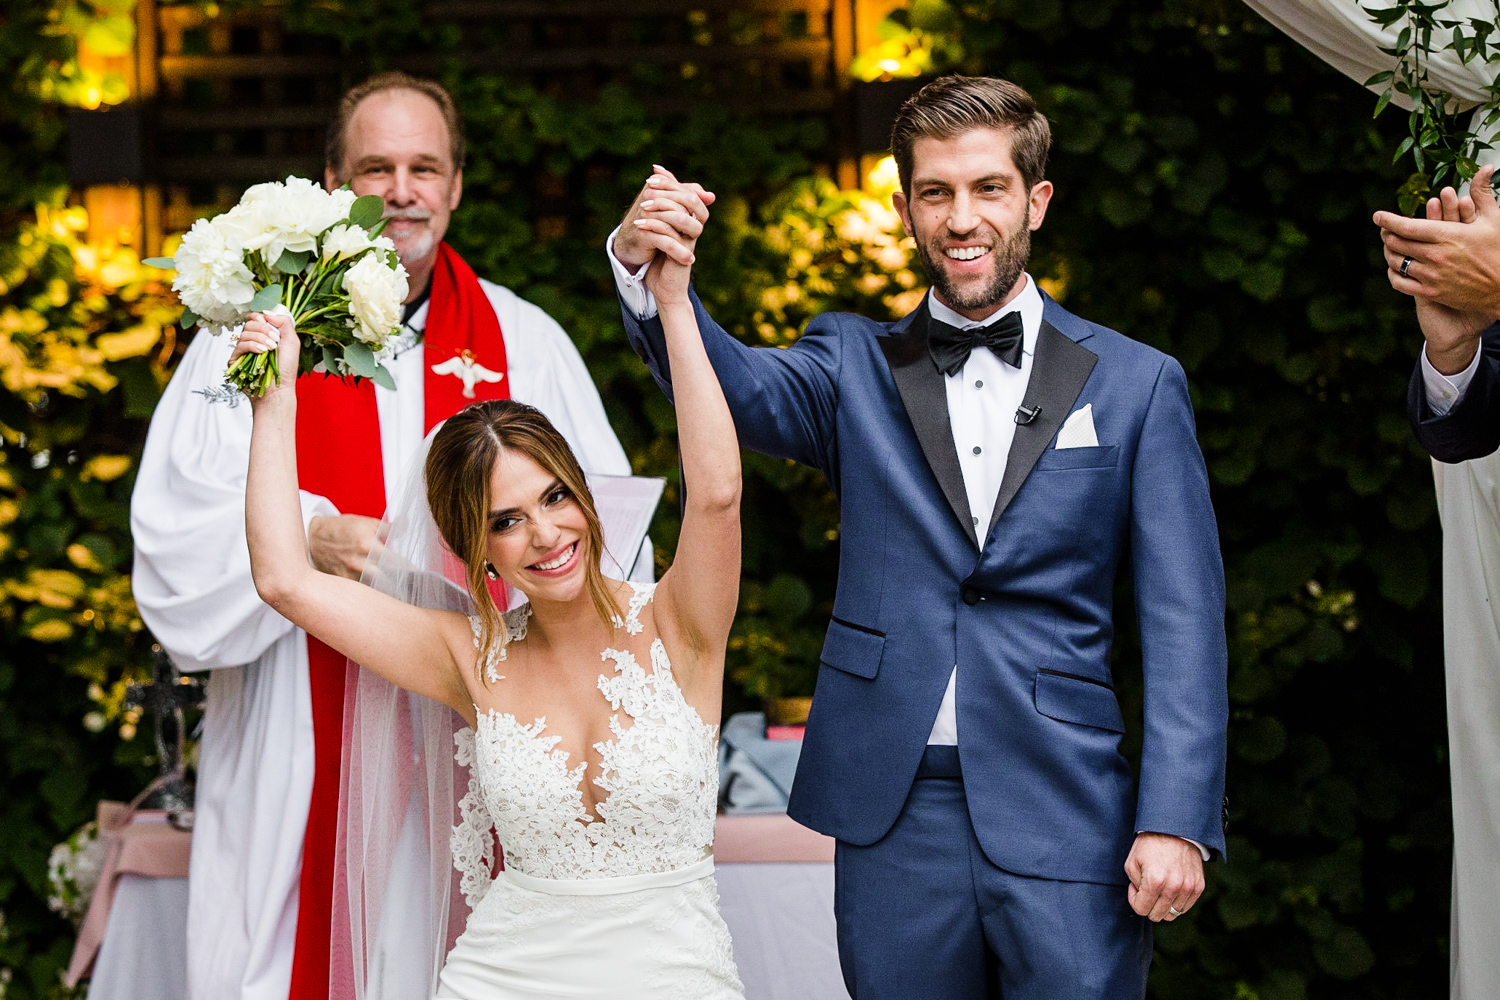 A bride and groom celebrate at the end of their Gallery Marchetti wedding ceremony.